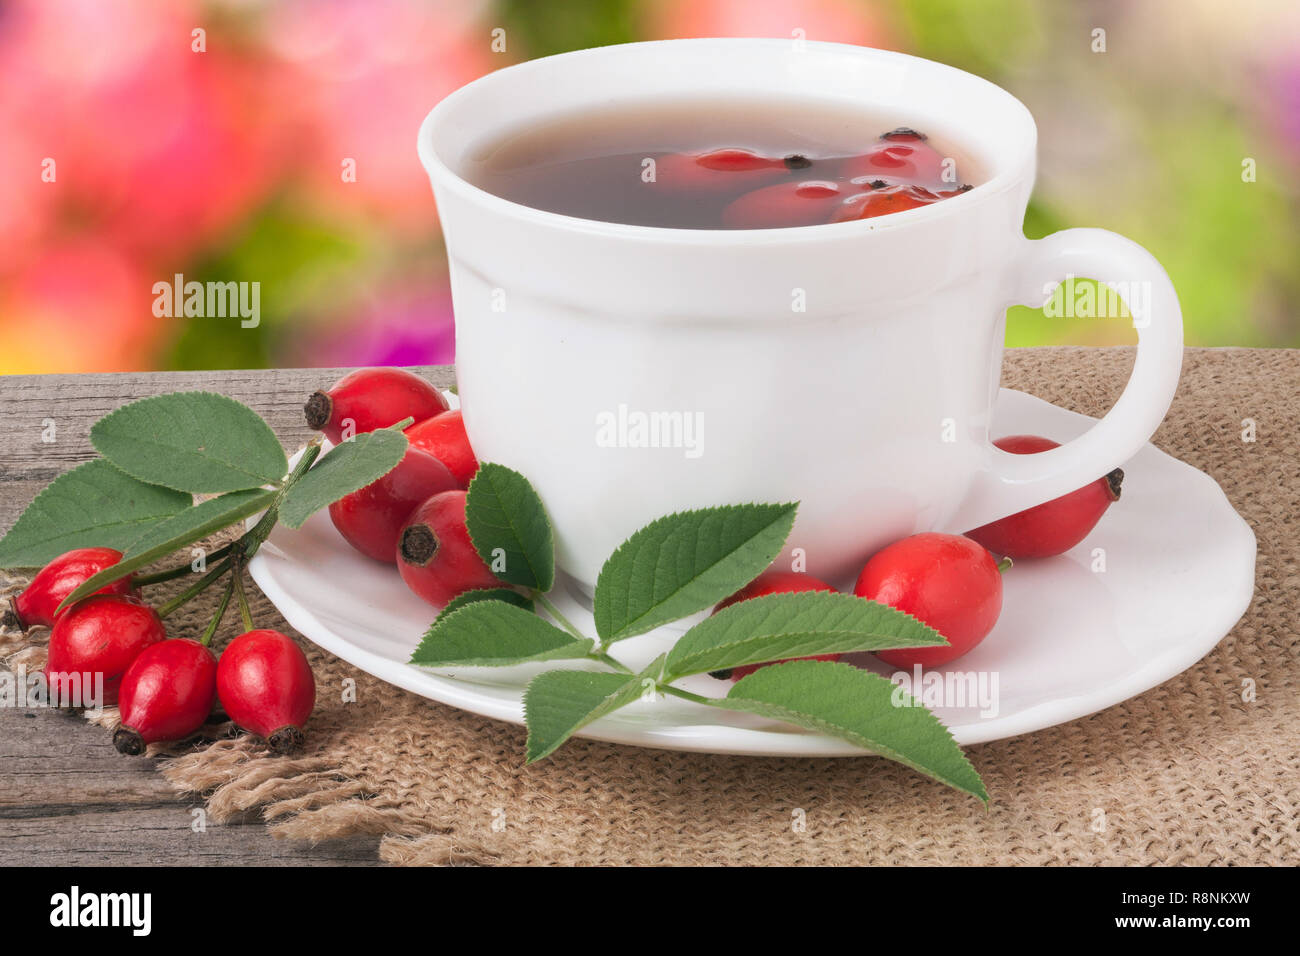 Tea from the hips on the wooden table with a blurred background Stock Photo